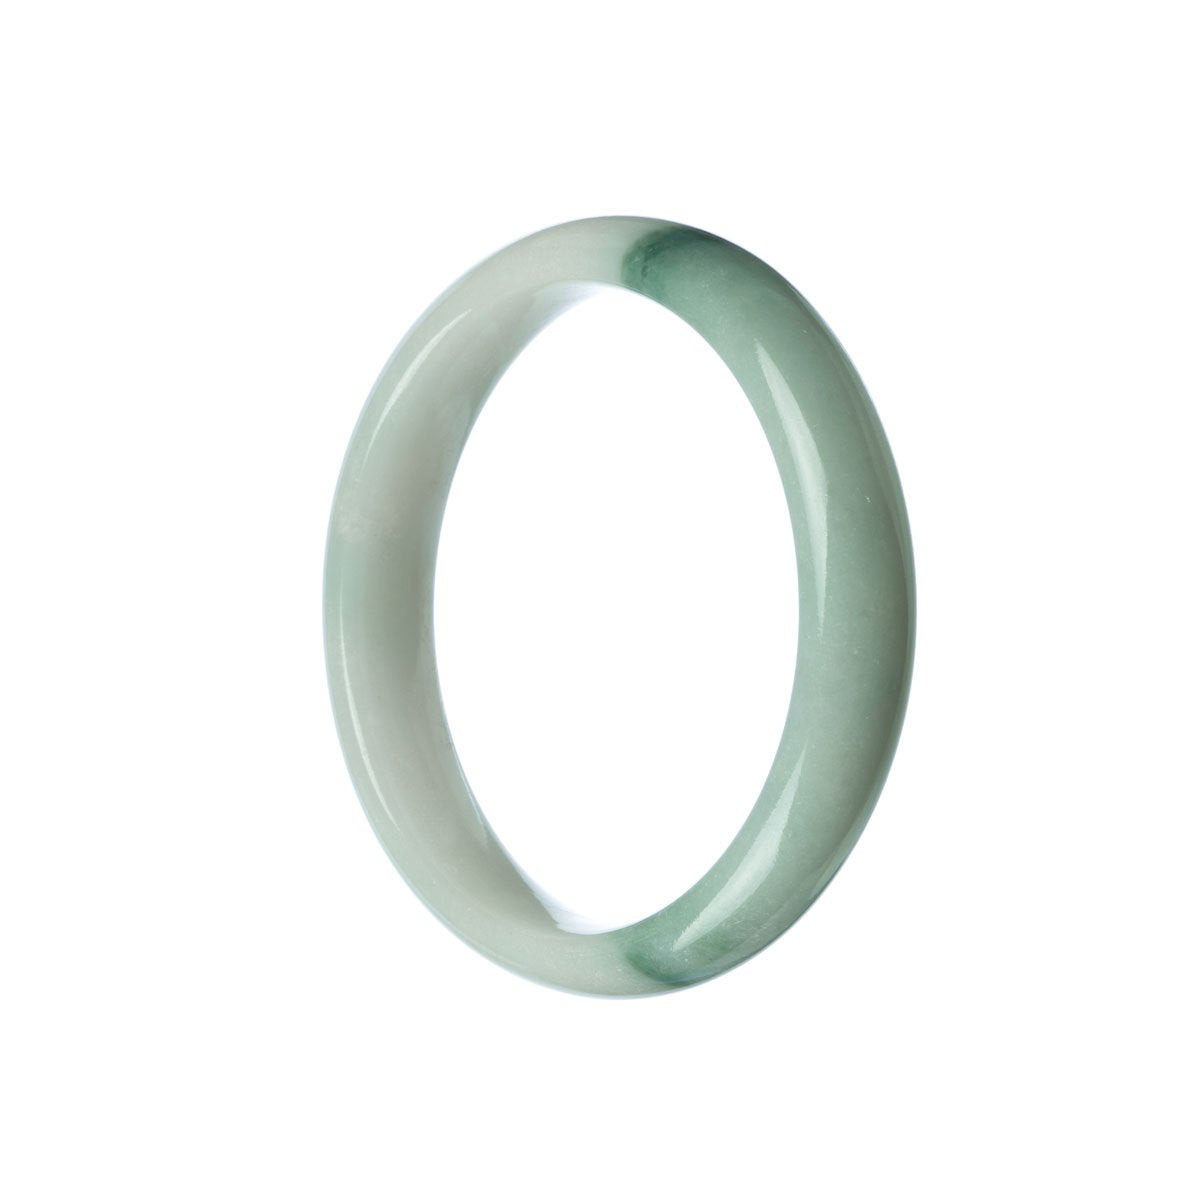 A close-up image of a half-moon shaped, genuine natural white jade bangle. The bangle is smooth and polished, showcasing its elegant and traditional design. The size is 56mm, making it a perfect fit for most wrists. Created by MAYS GEMS.